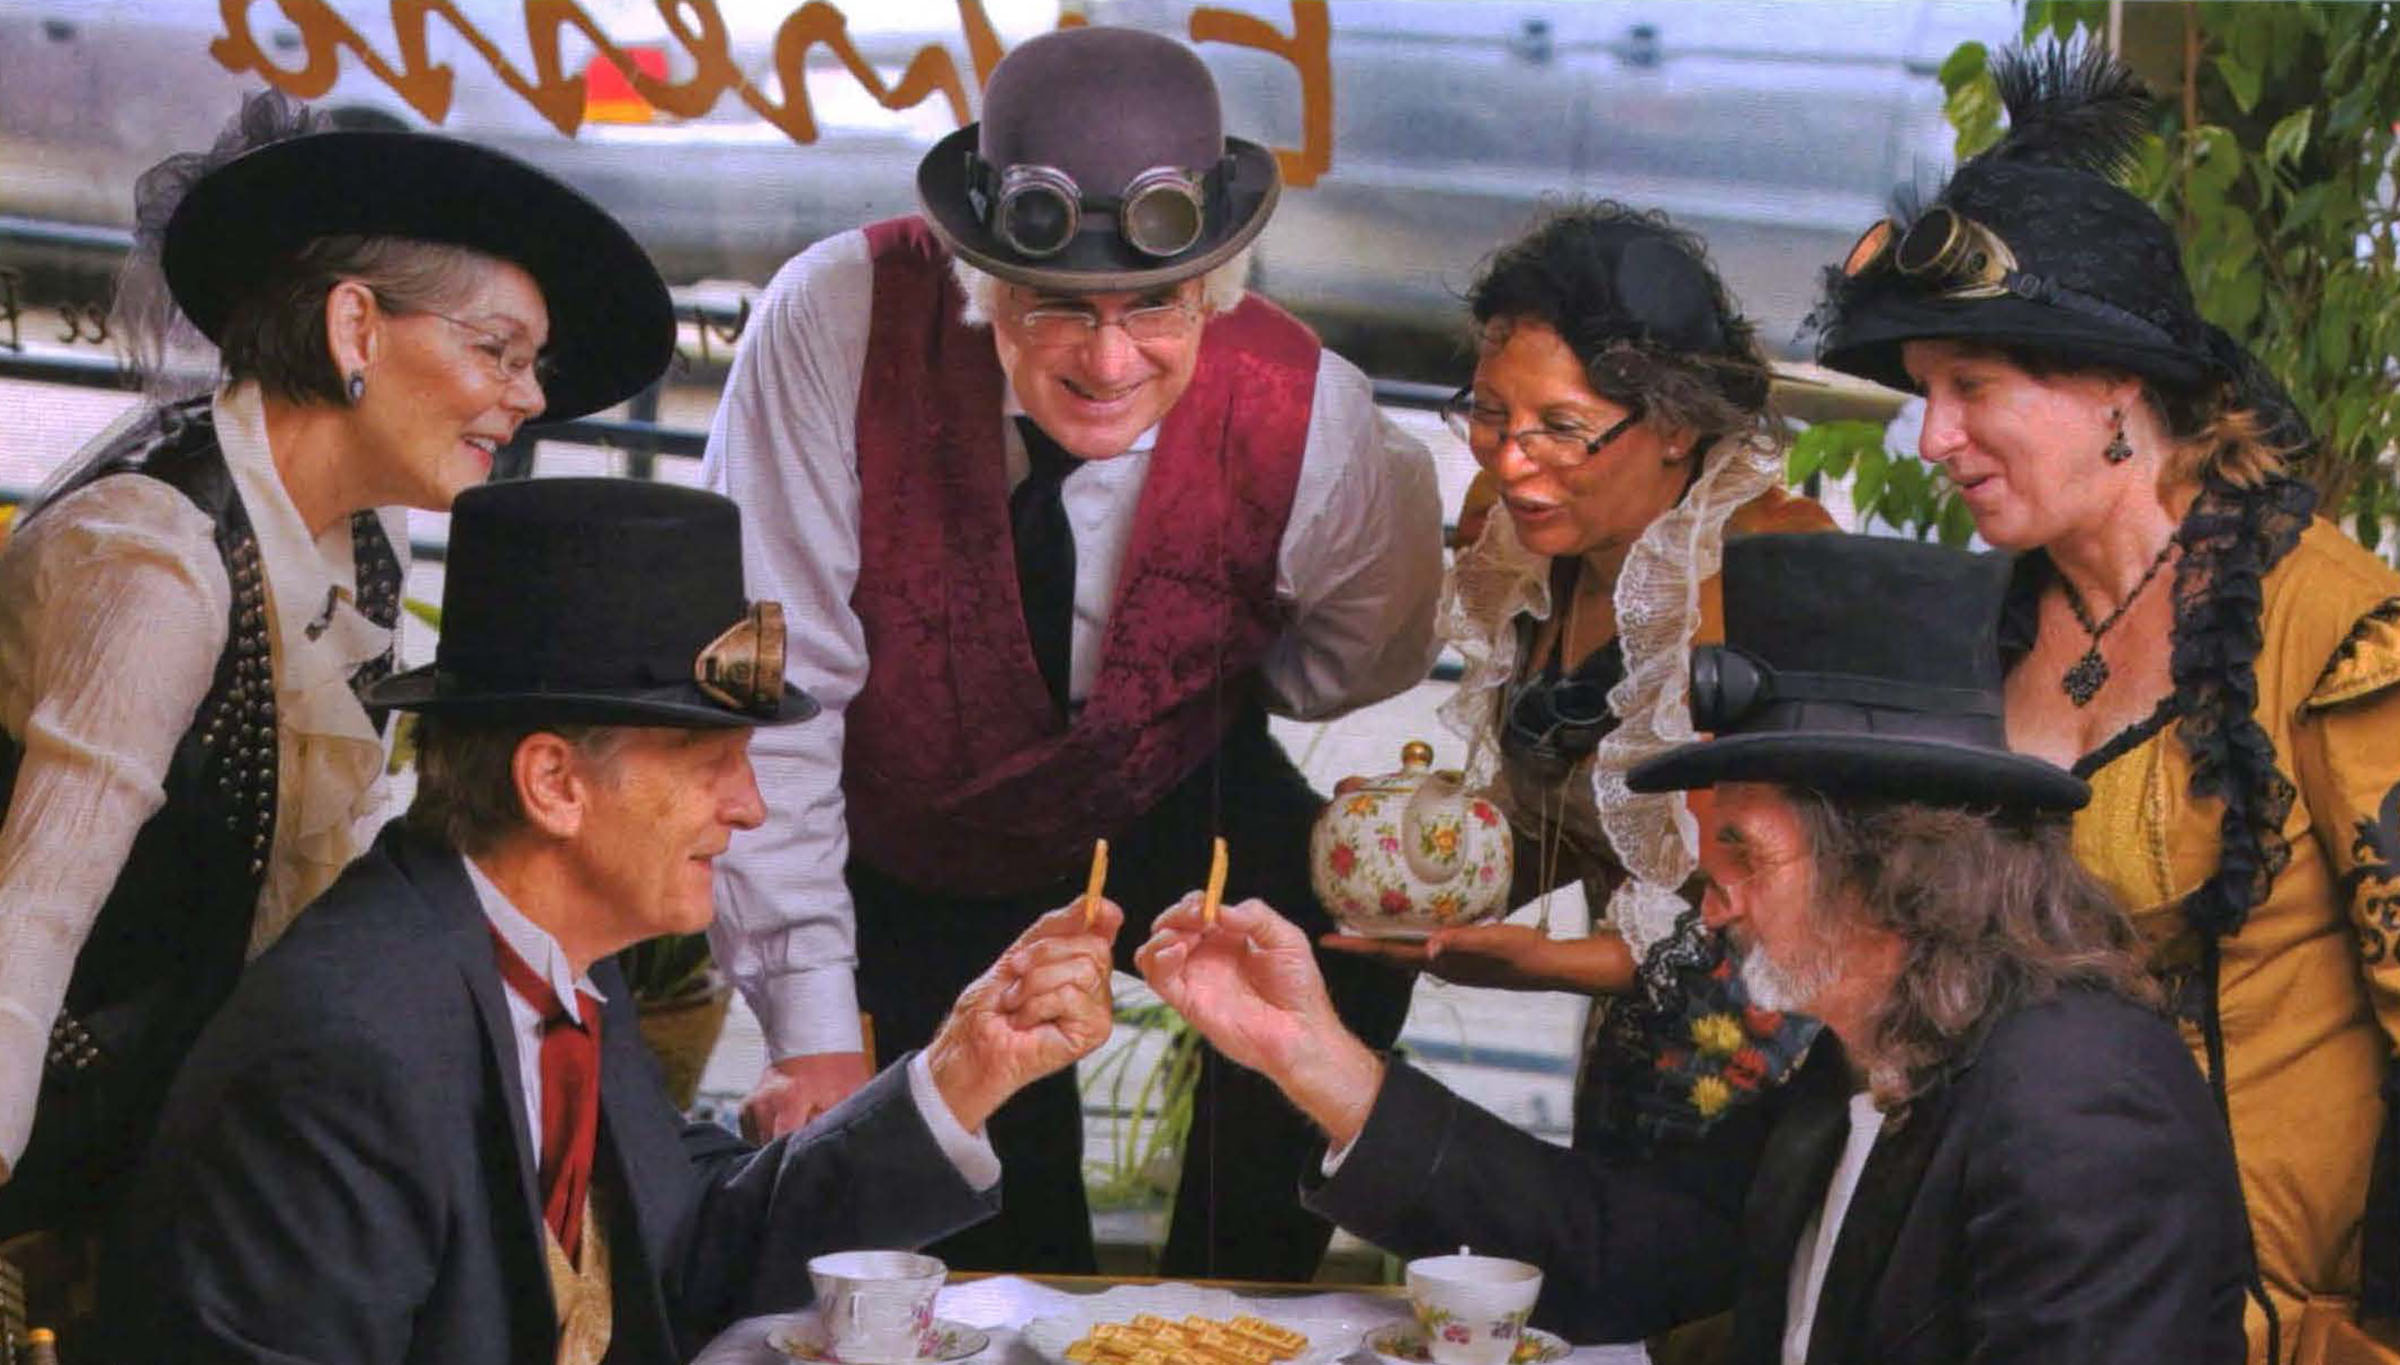 Six people in costume surround a table